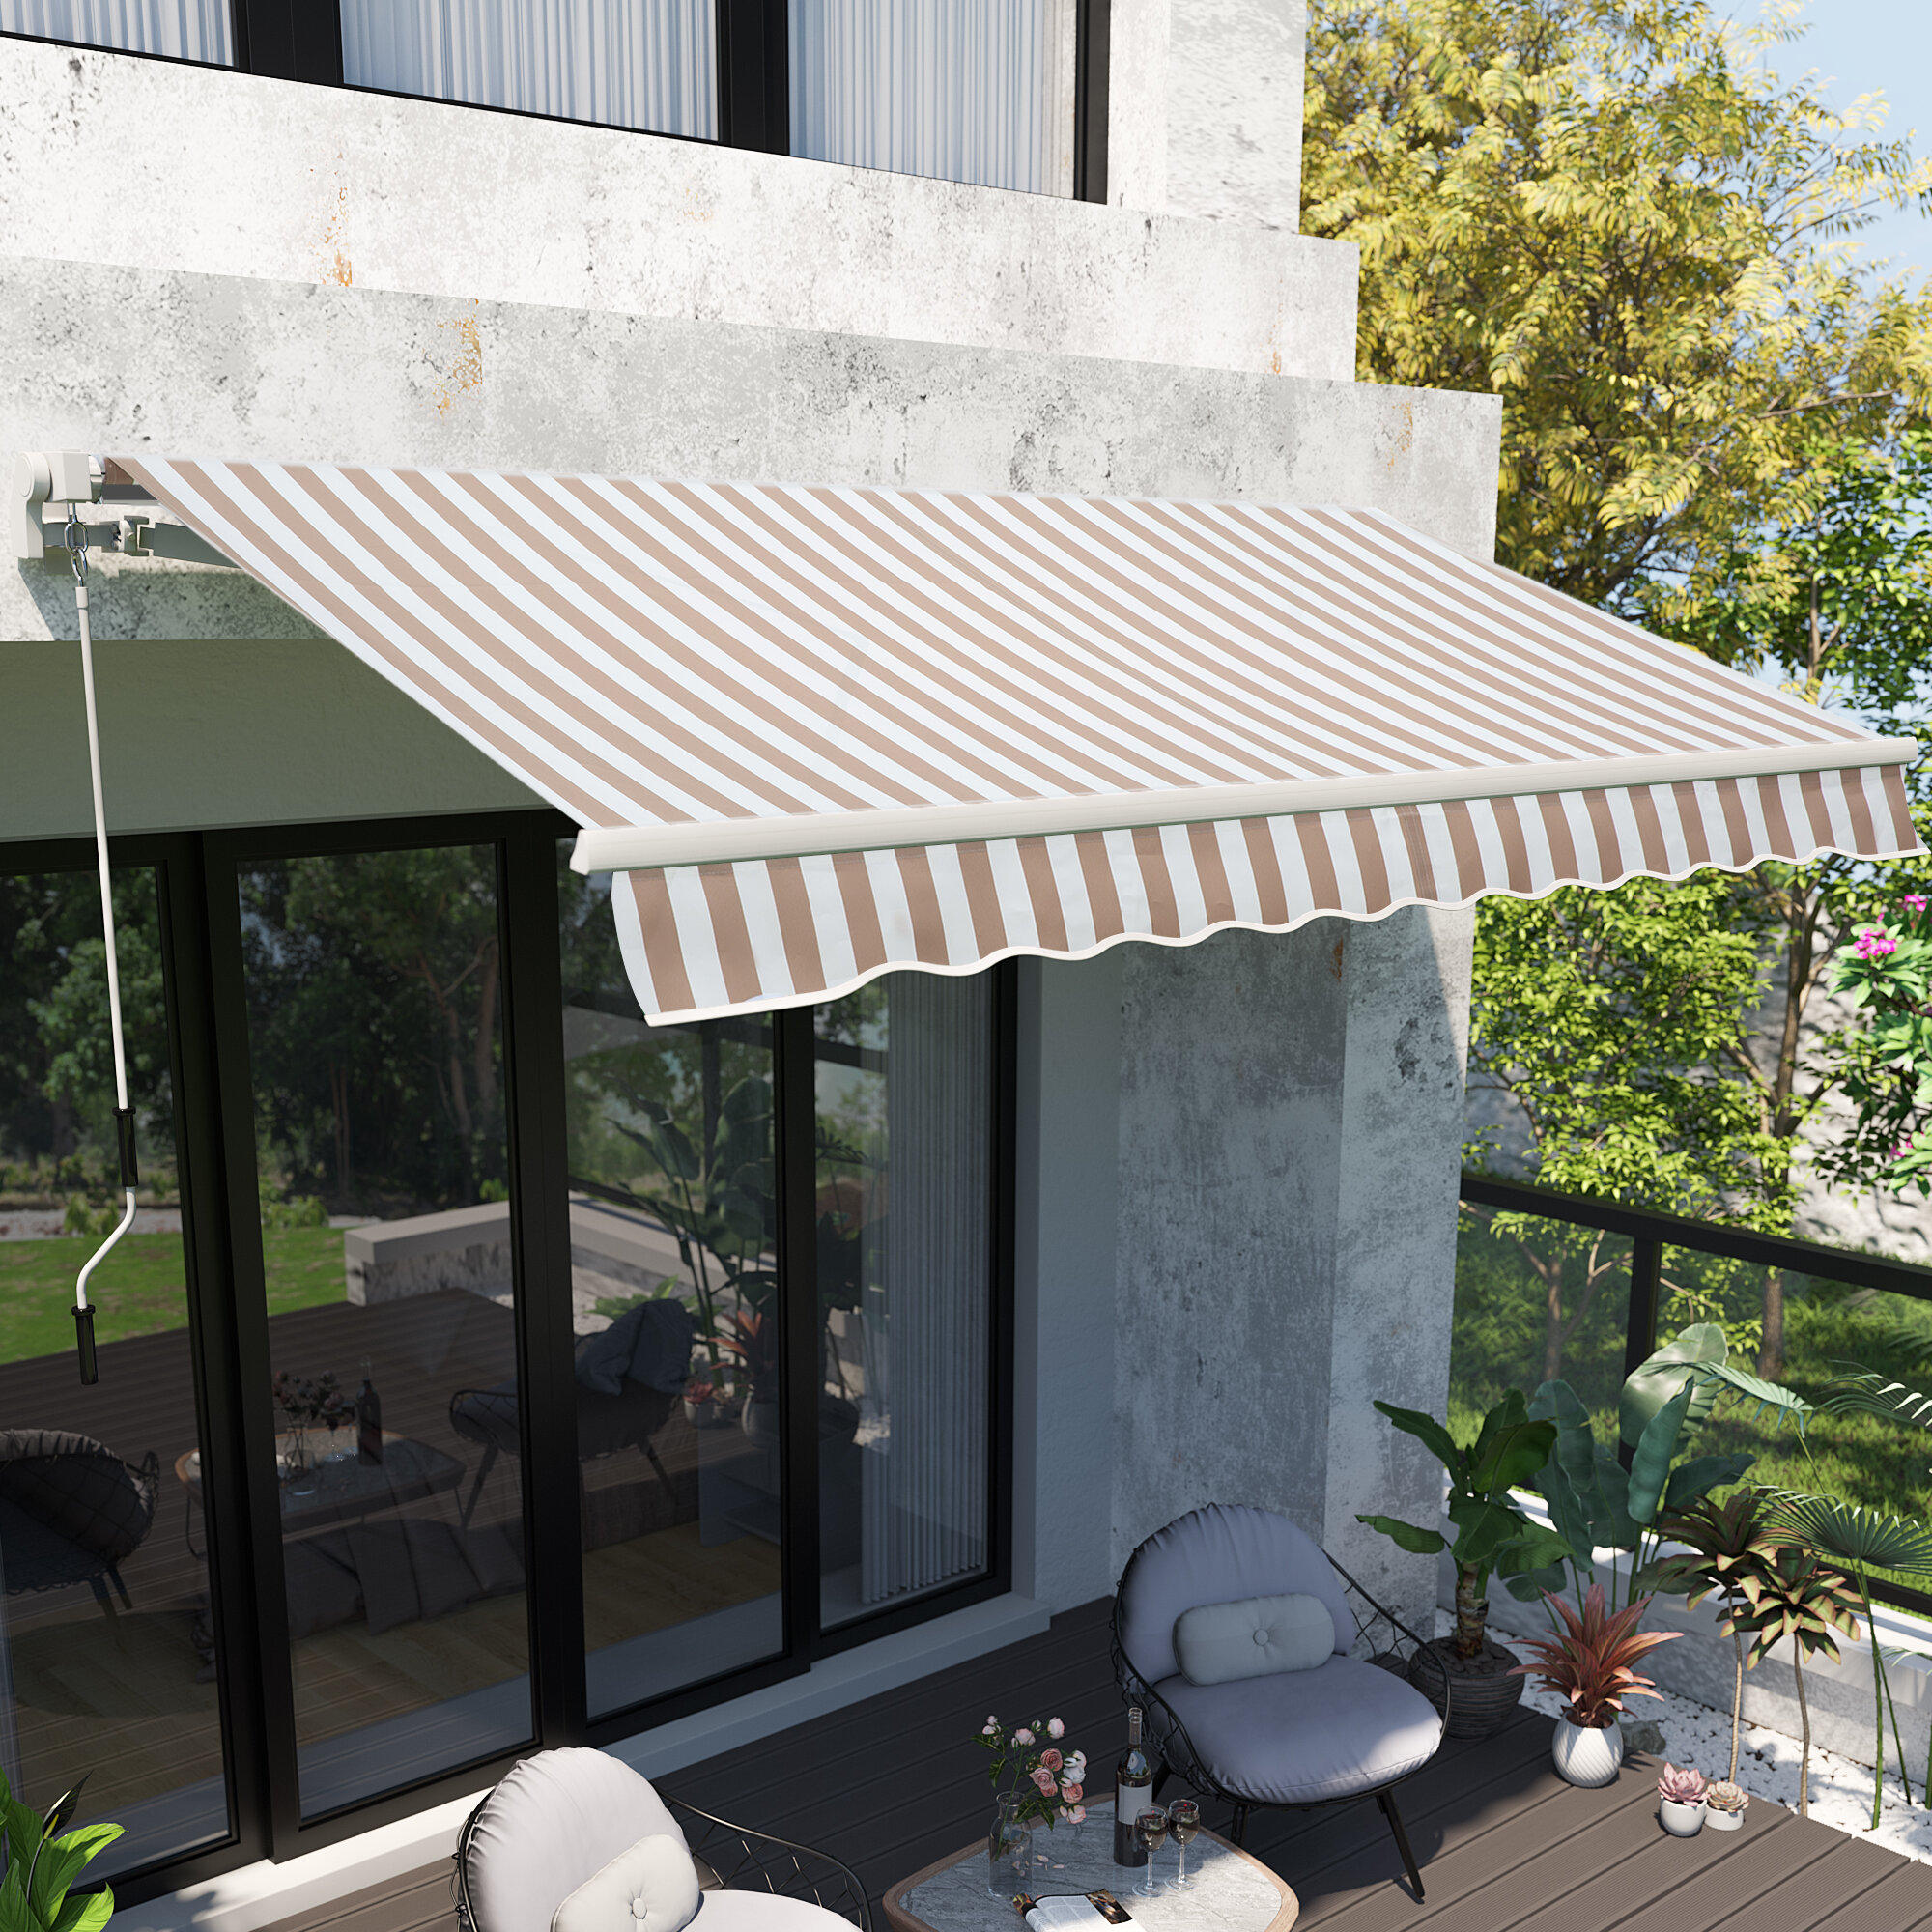 Outdoor Patio Manual Awning Cover Tangkula 8’× 6.5’ Retractable Awning Aluminum Patio Sun Shade w/Crank Handle and Water-Resistant Polyester Beige 